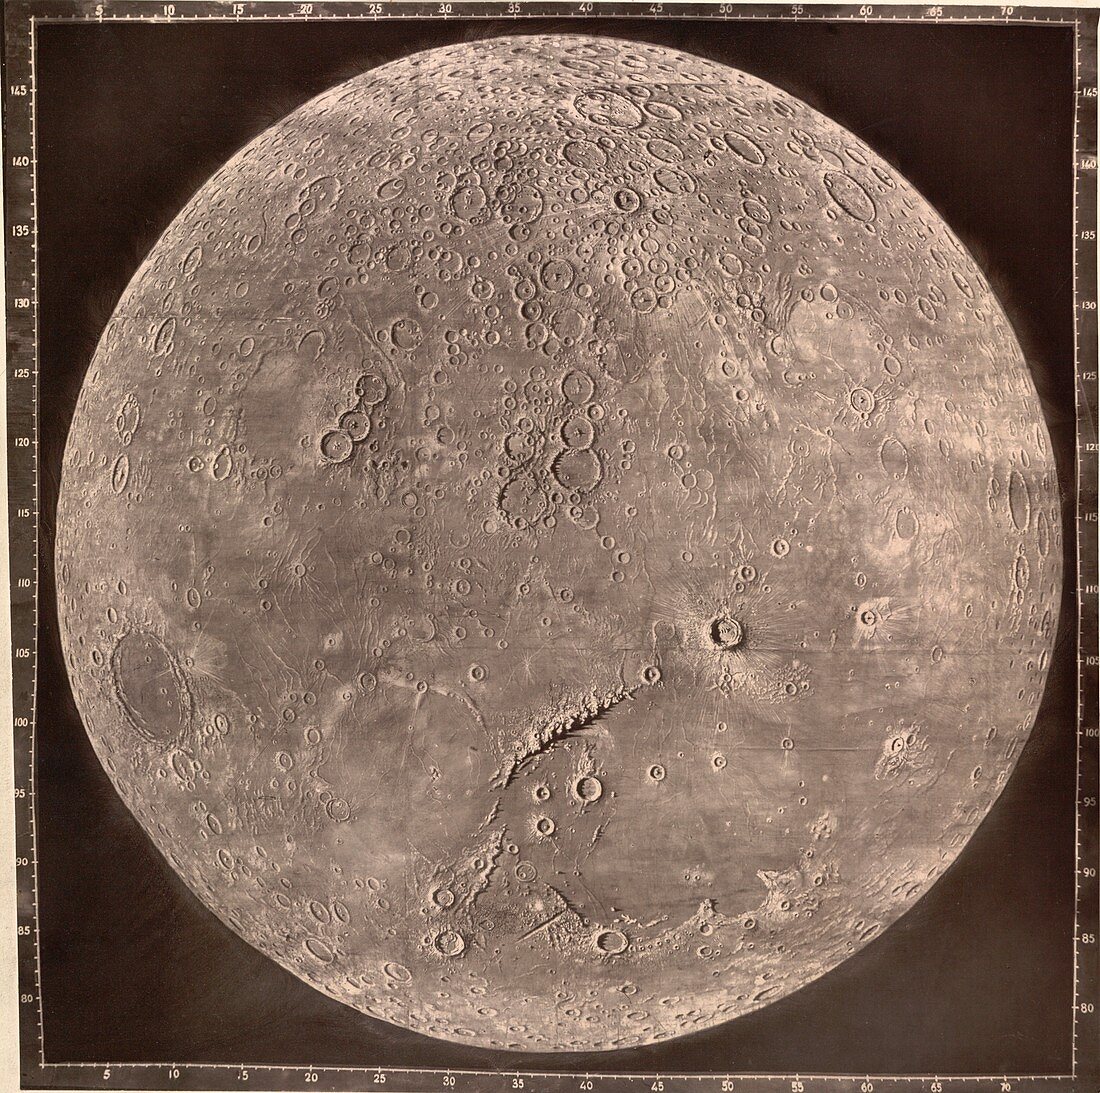 Photograph of the Moon,1870